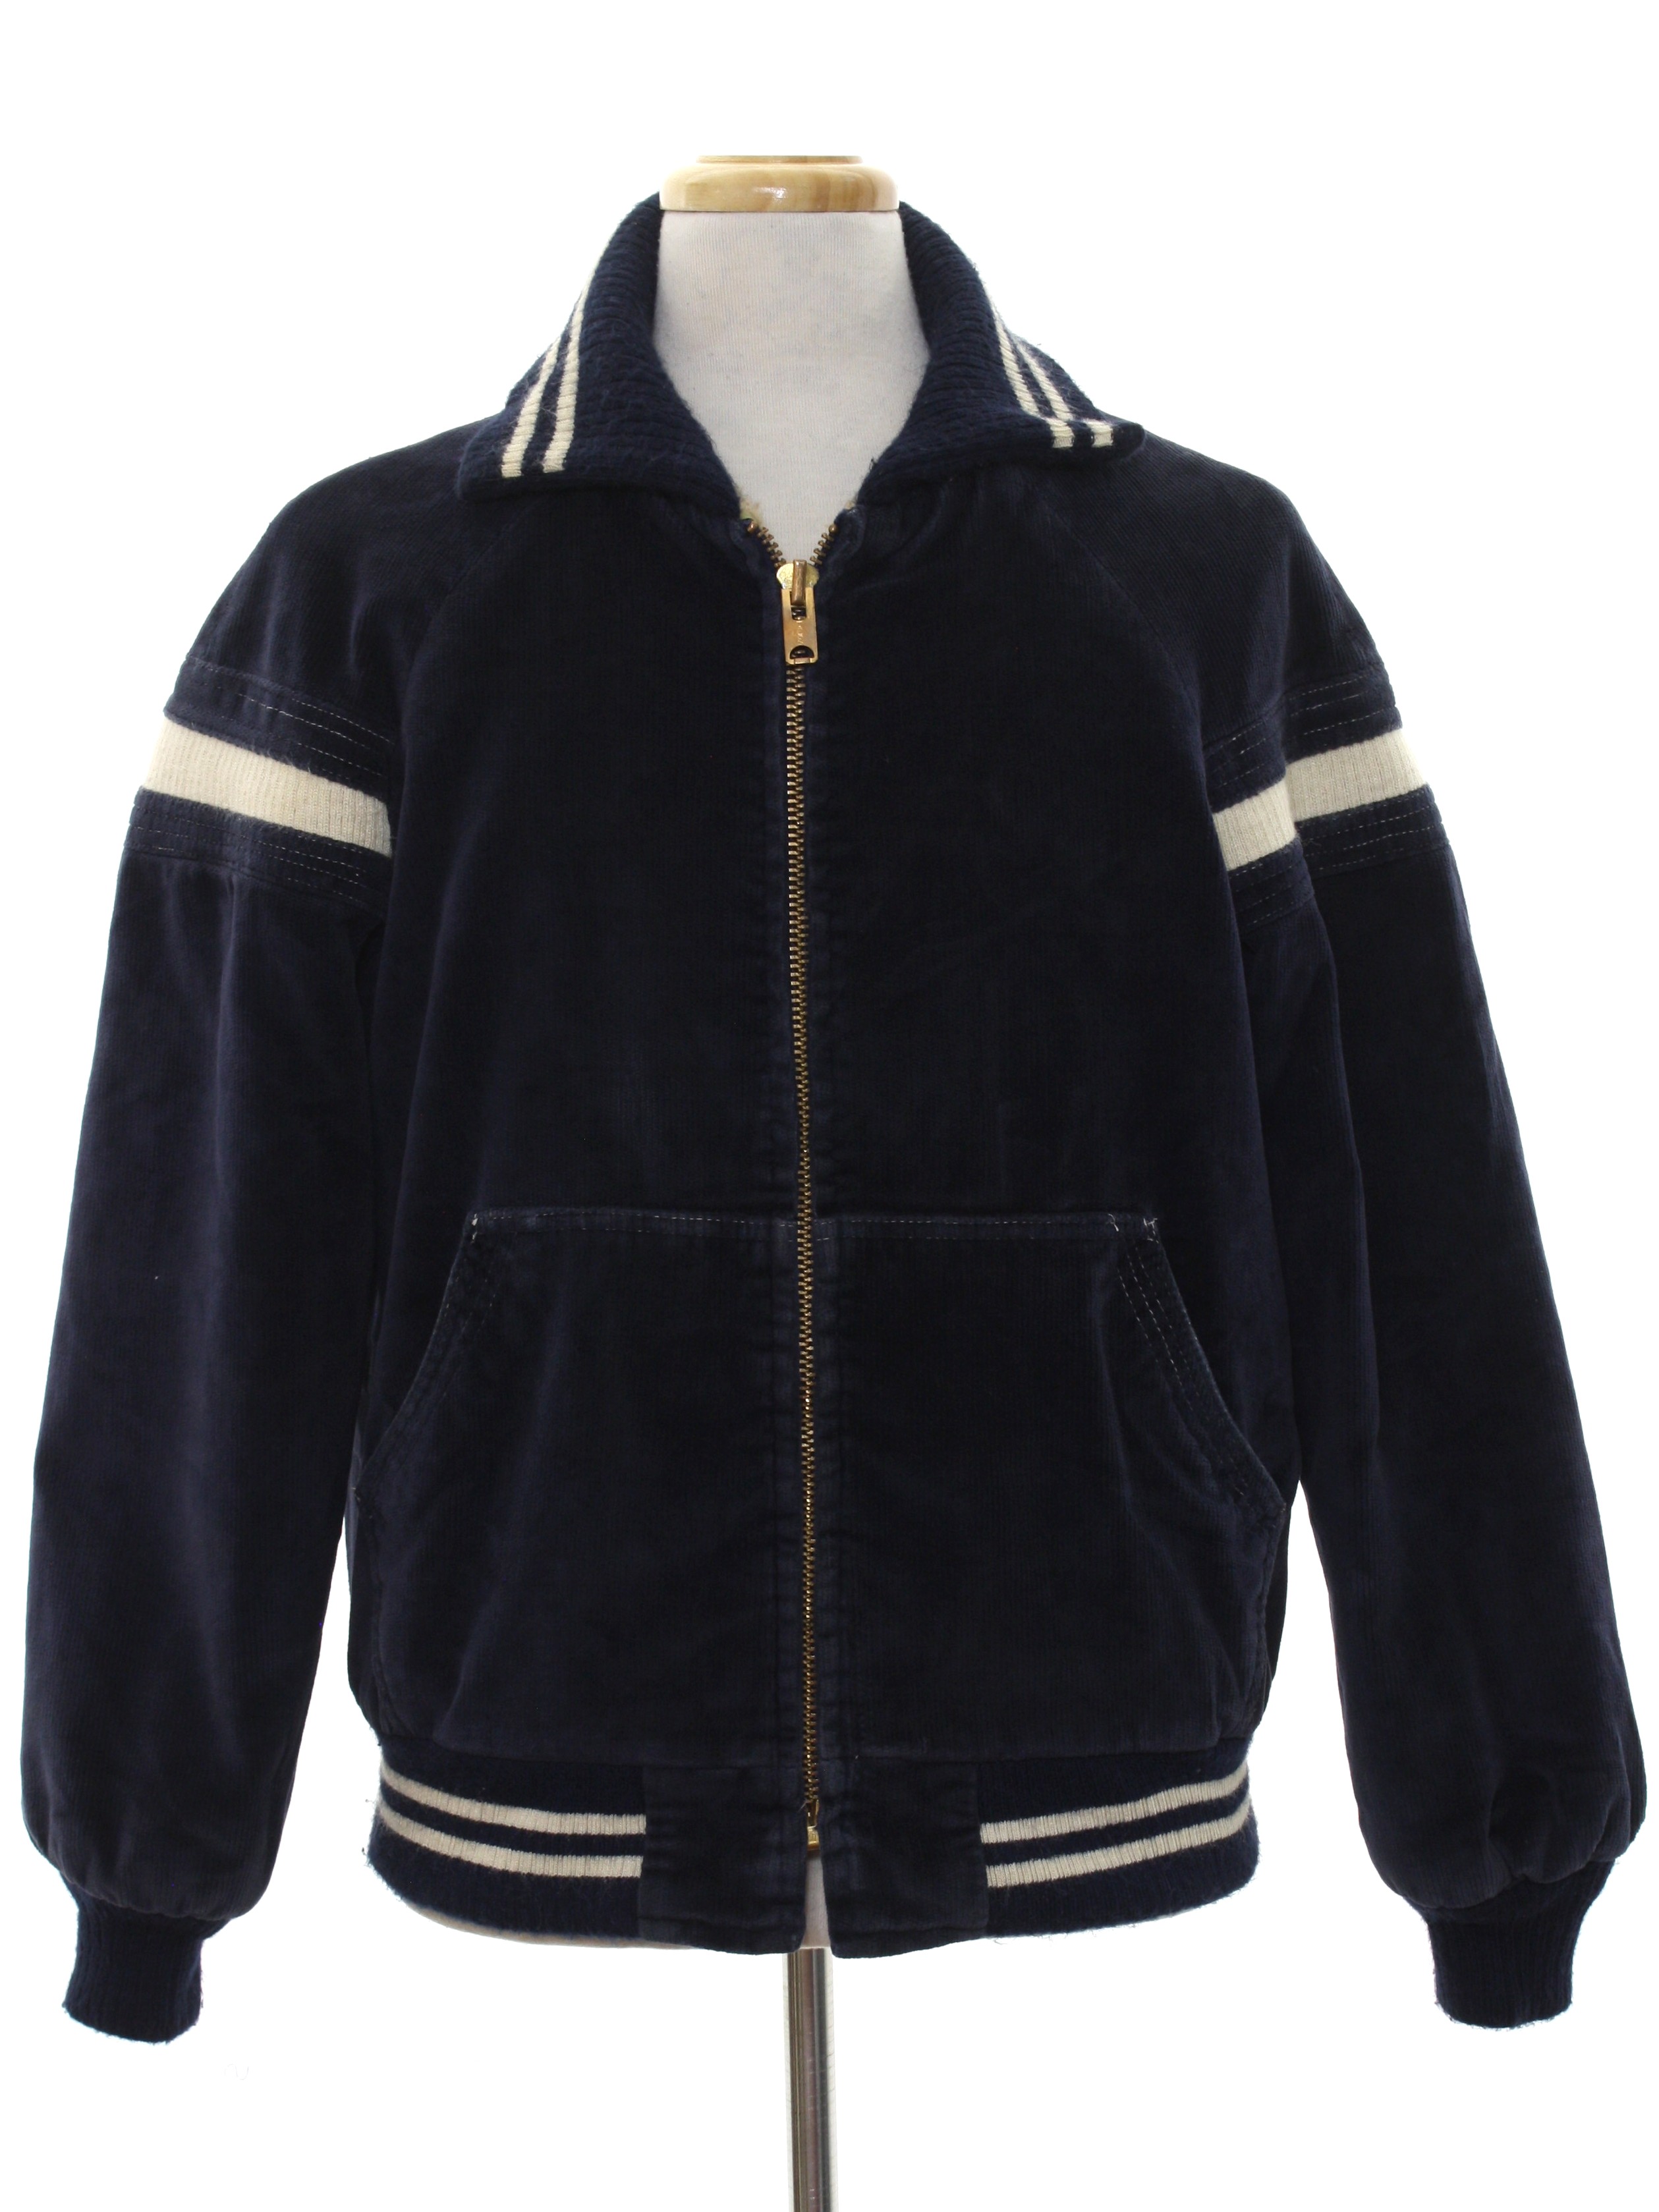 William Barry Seventies Vintage Jacket: Late 70s or Early 80s -William ...